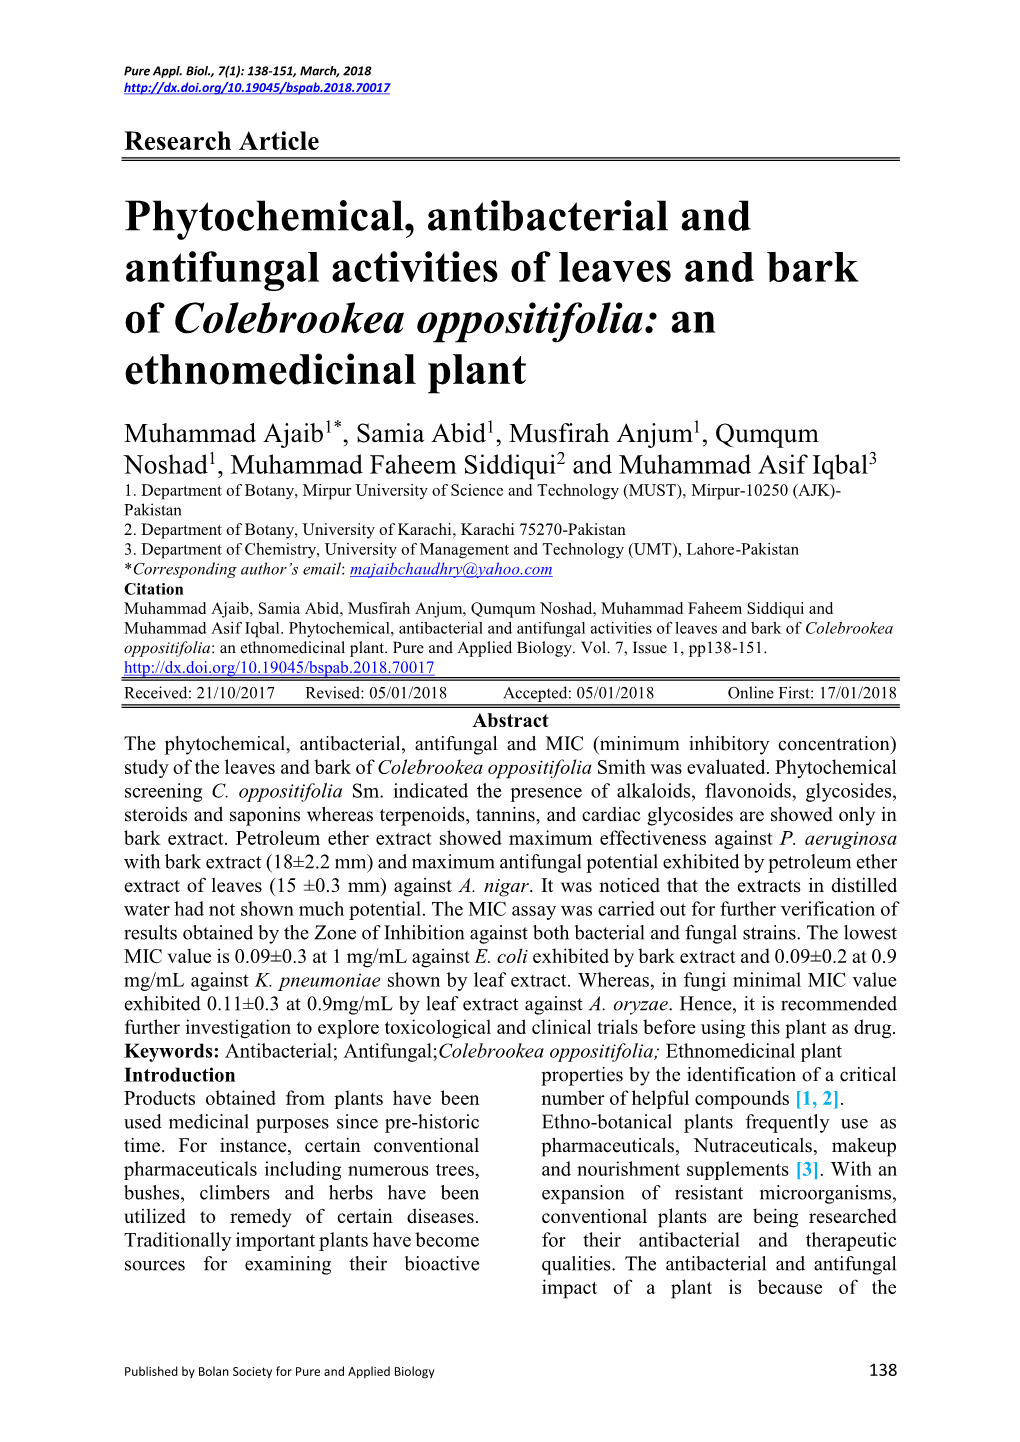 Phytochemical, Antibacterial and Antifungal Activities of Leaves and Bark of Colebrookea Oppositifolia: an Ethnomedicinal Plant